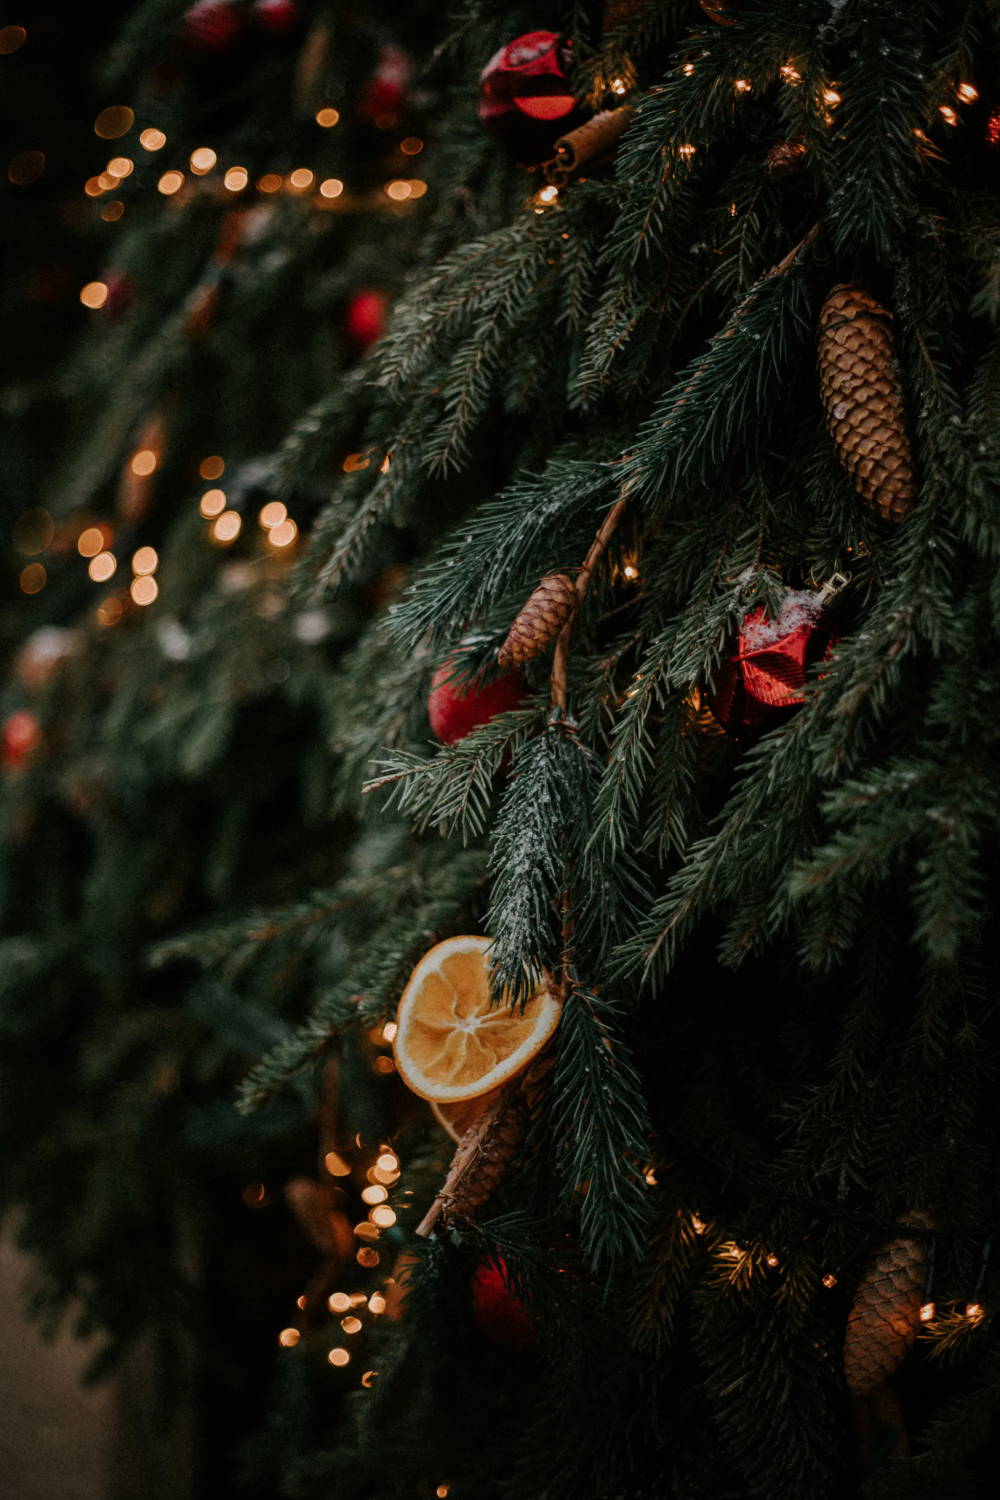 Closeup of Christmas tree bough, decorated with red ornaments, dried orange slices, and pine cones